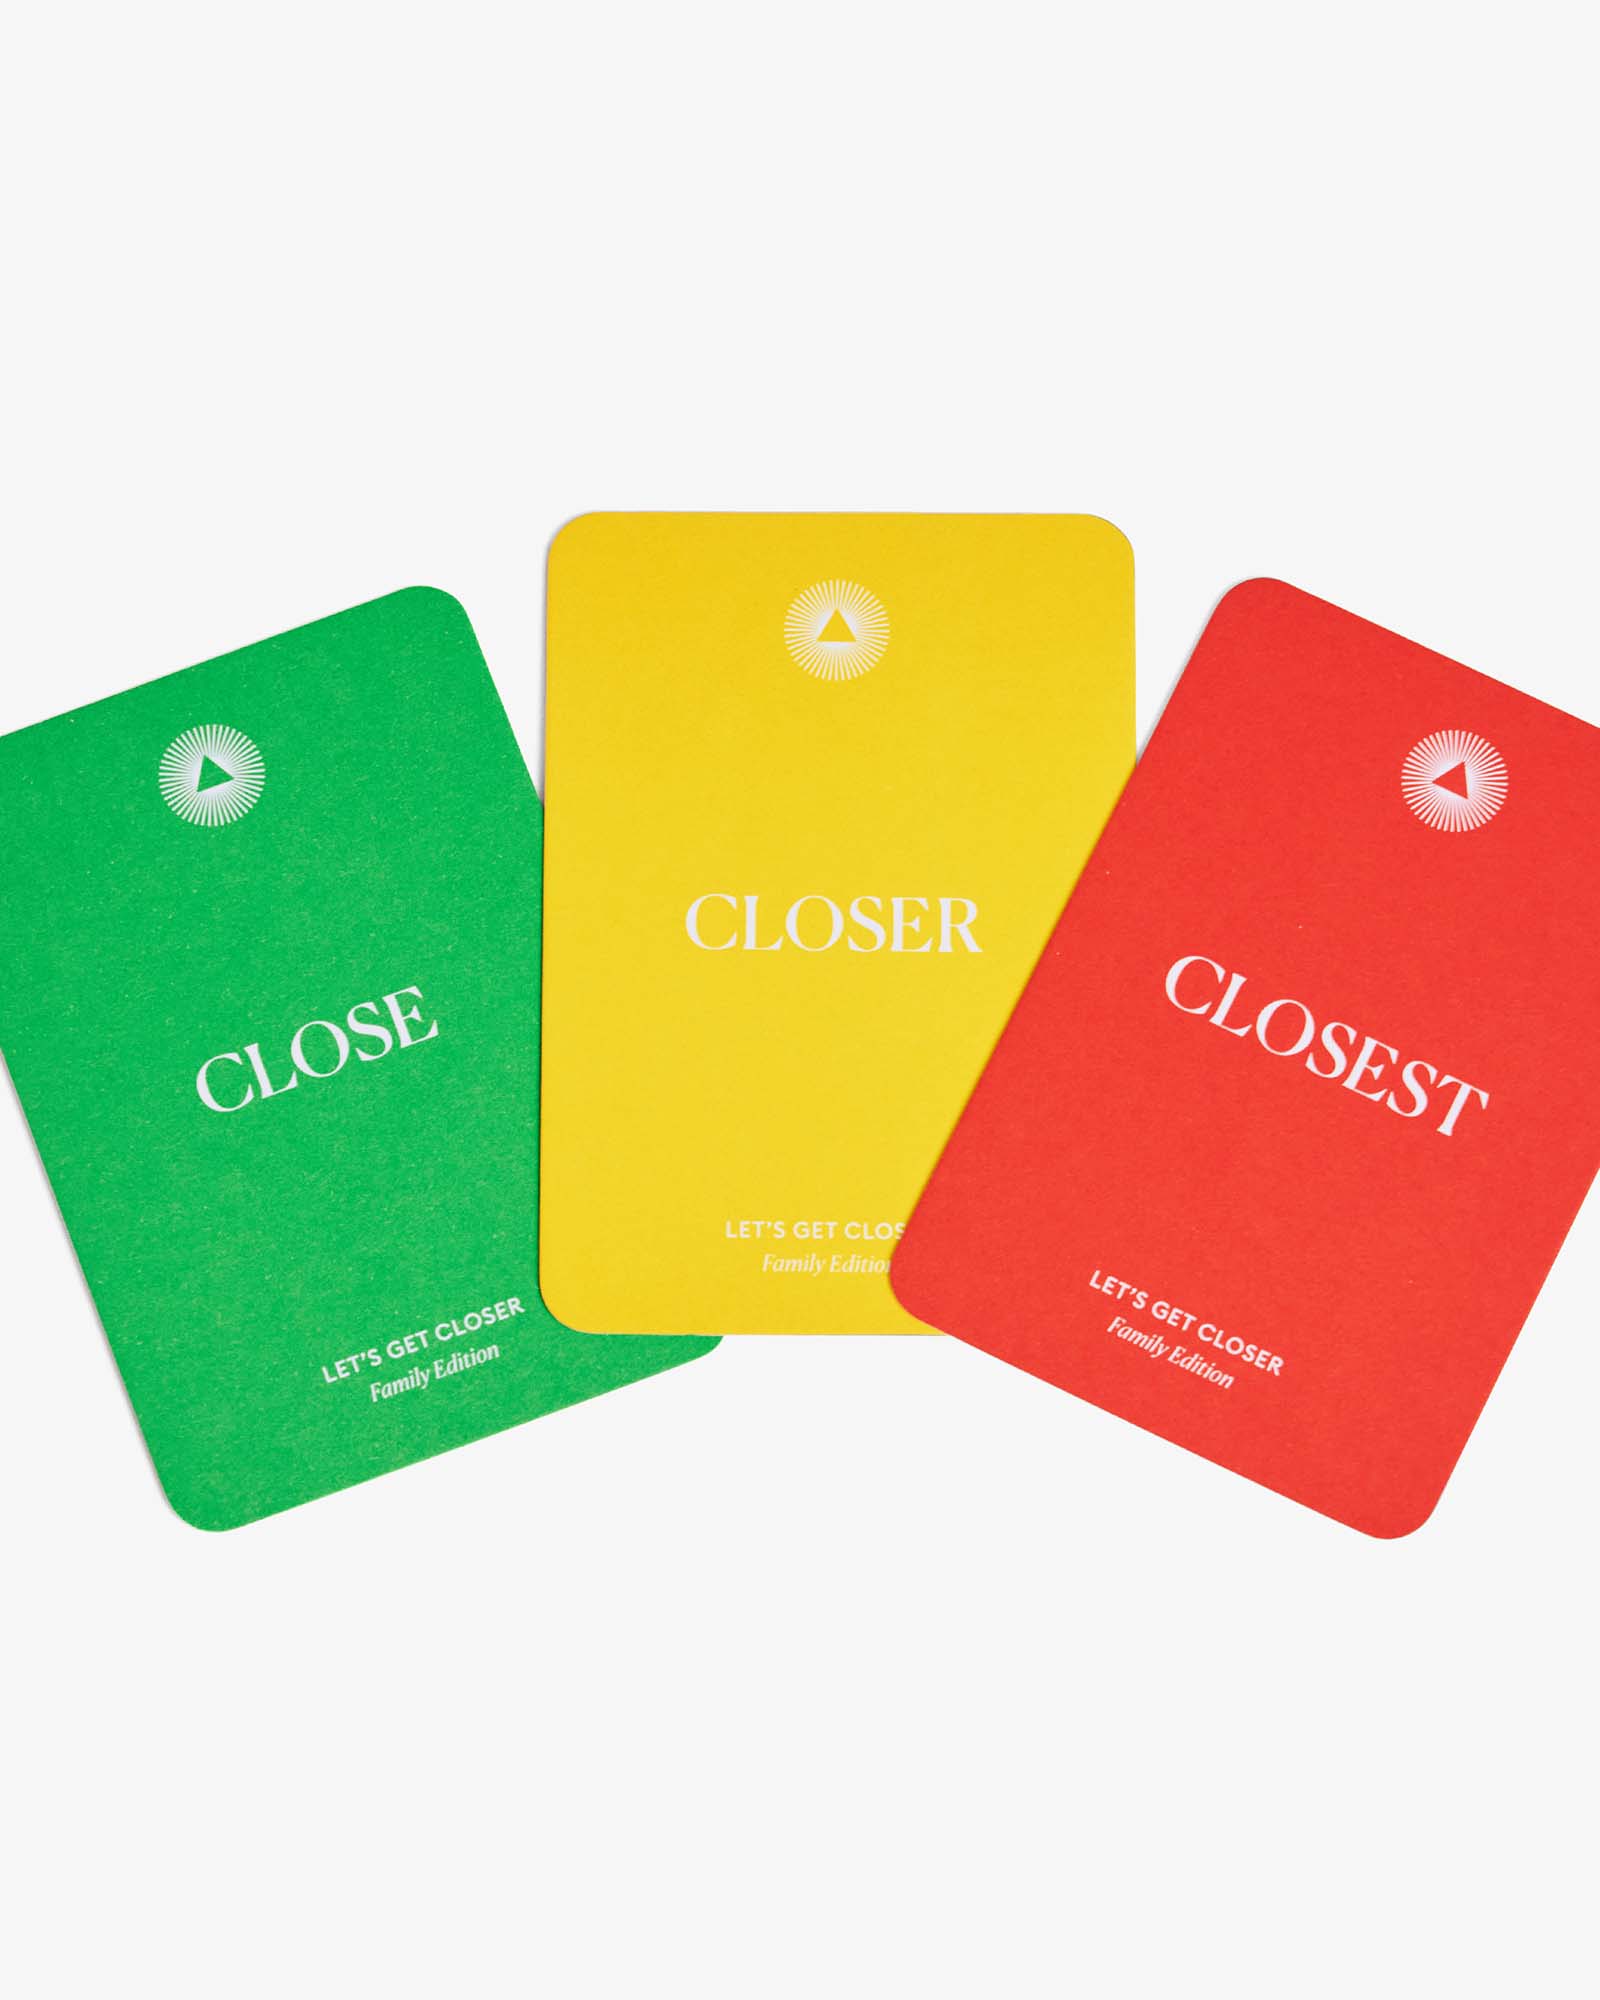  Let's Get Closer: Family - Family by Intelligent Change Intelligent Change Perfumarie